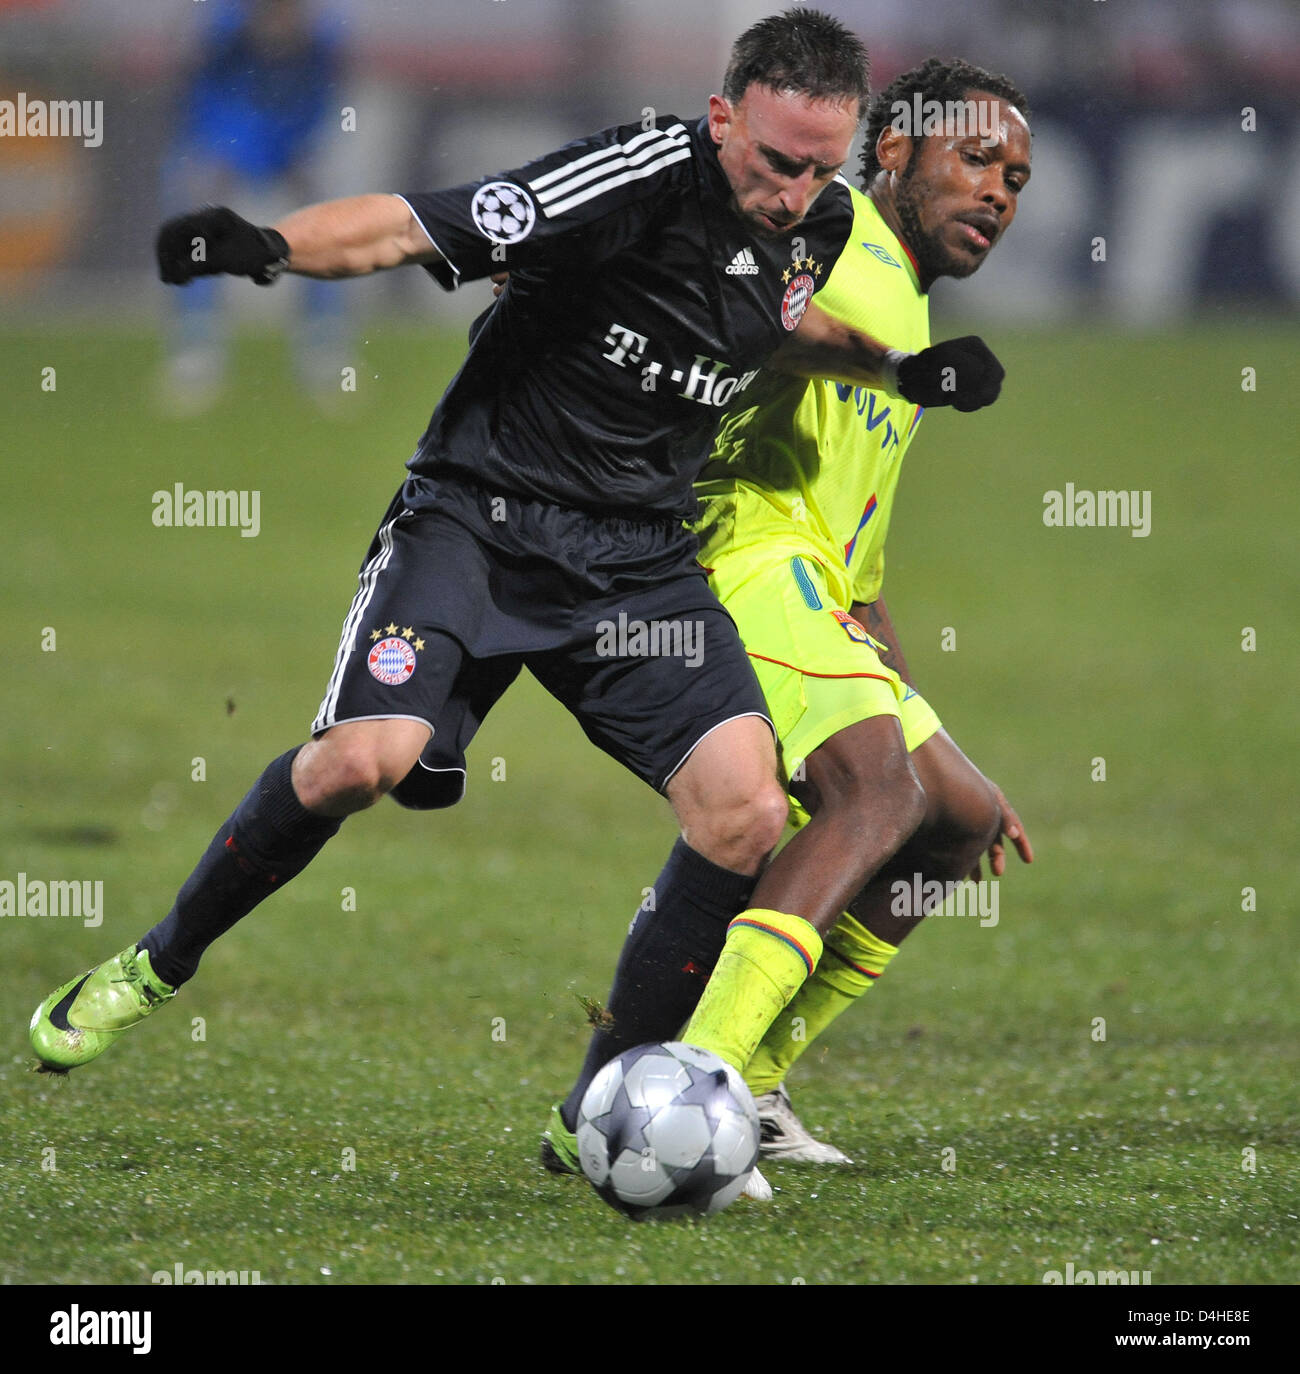 Sidney Govou (R) of Olympique Lyon vies for the ball with Franck Ribery of FC Bayern Munich during the Champions League Group F match at Stade de Gerland in Lyon, France, 10 December 2008. Bayern Munich defeated Lyon 3-2 securing the first place in UEFA Champions League Group F. Photo: Andreas Gebert Stock Photo